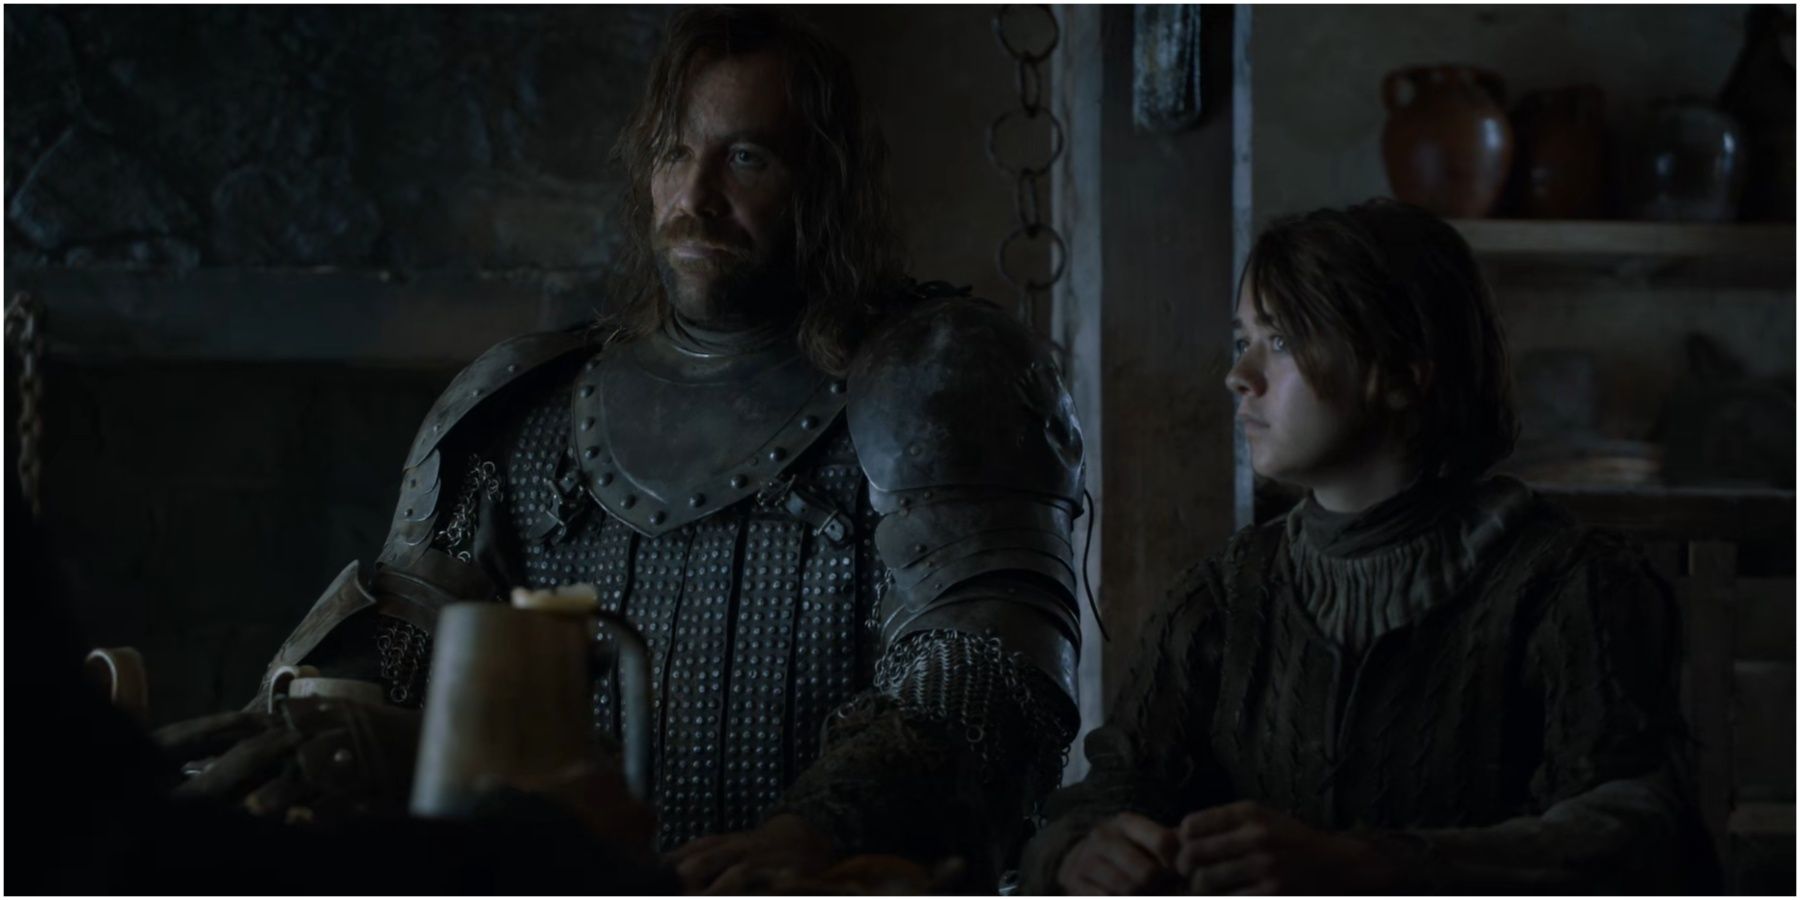 The Hound and Arya in Game of Thrones.